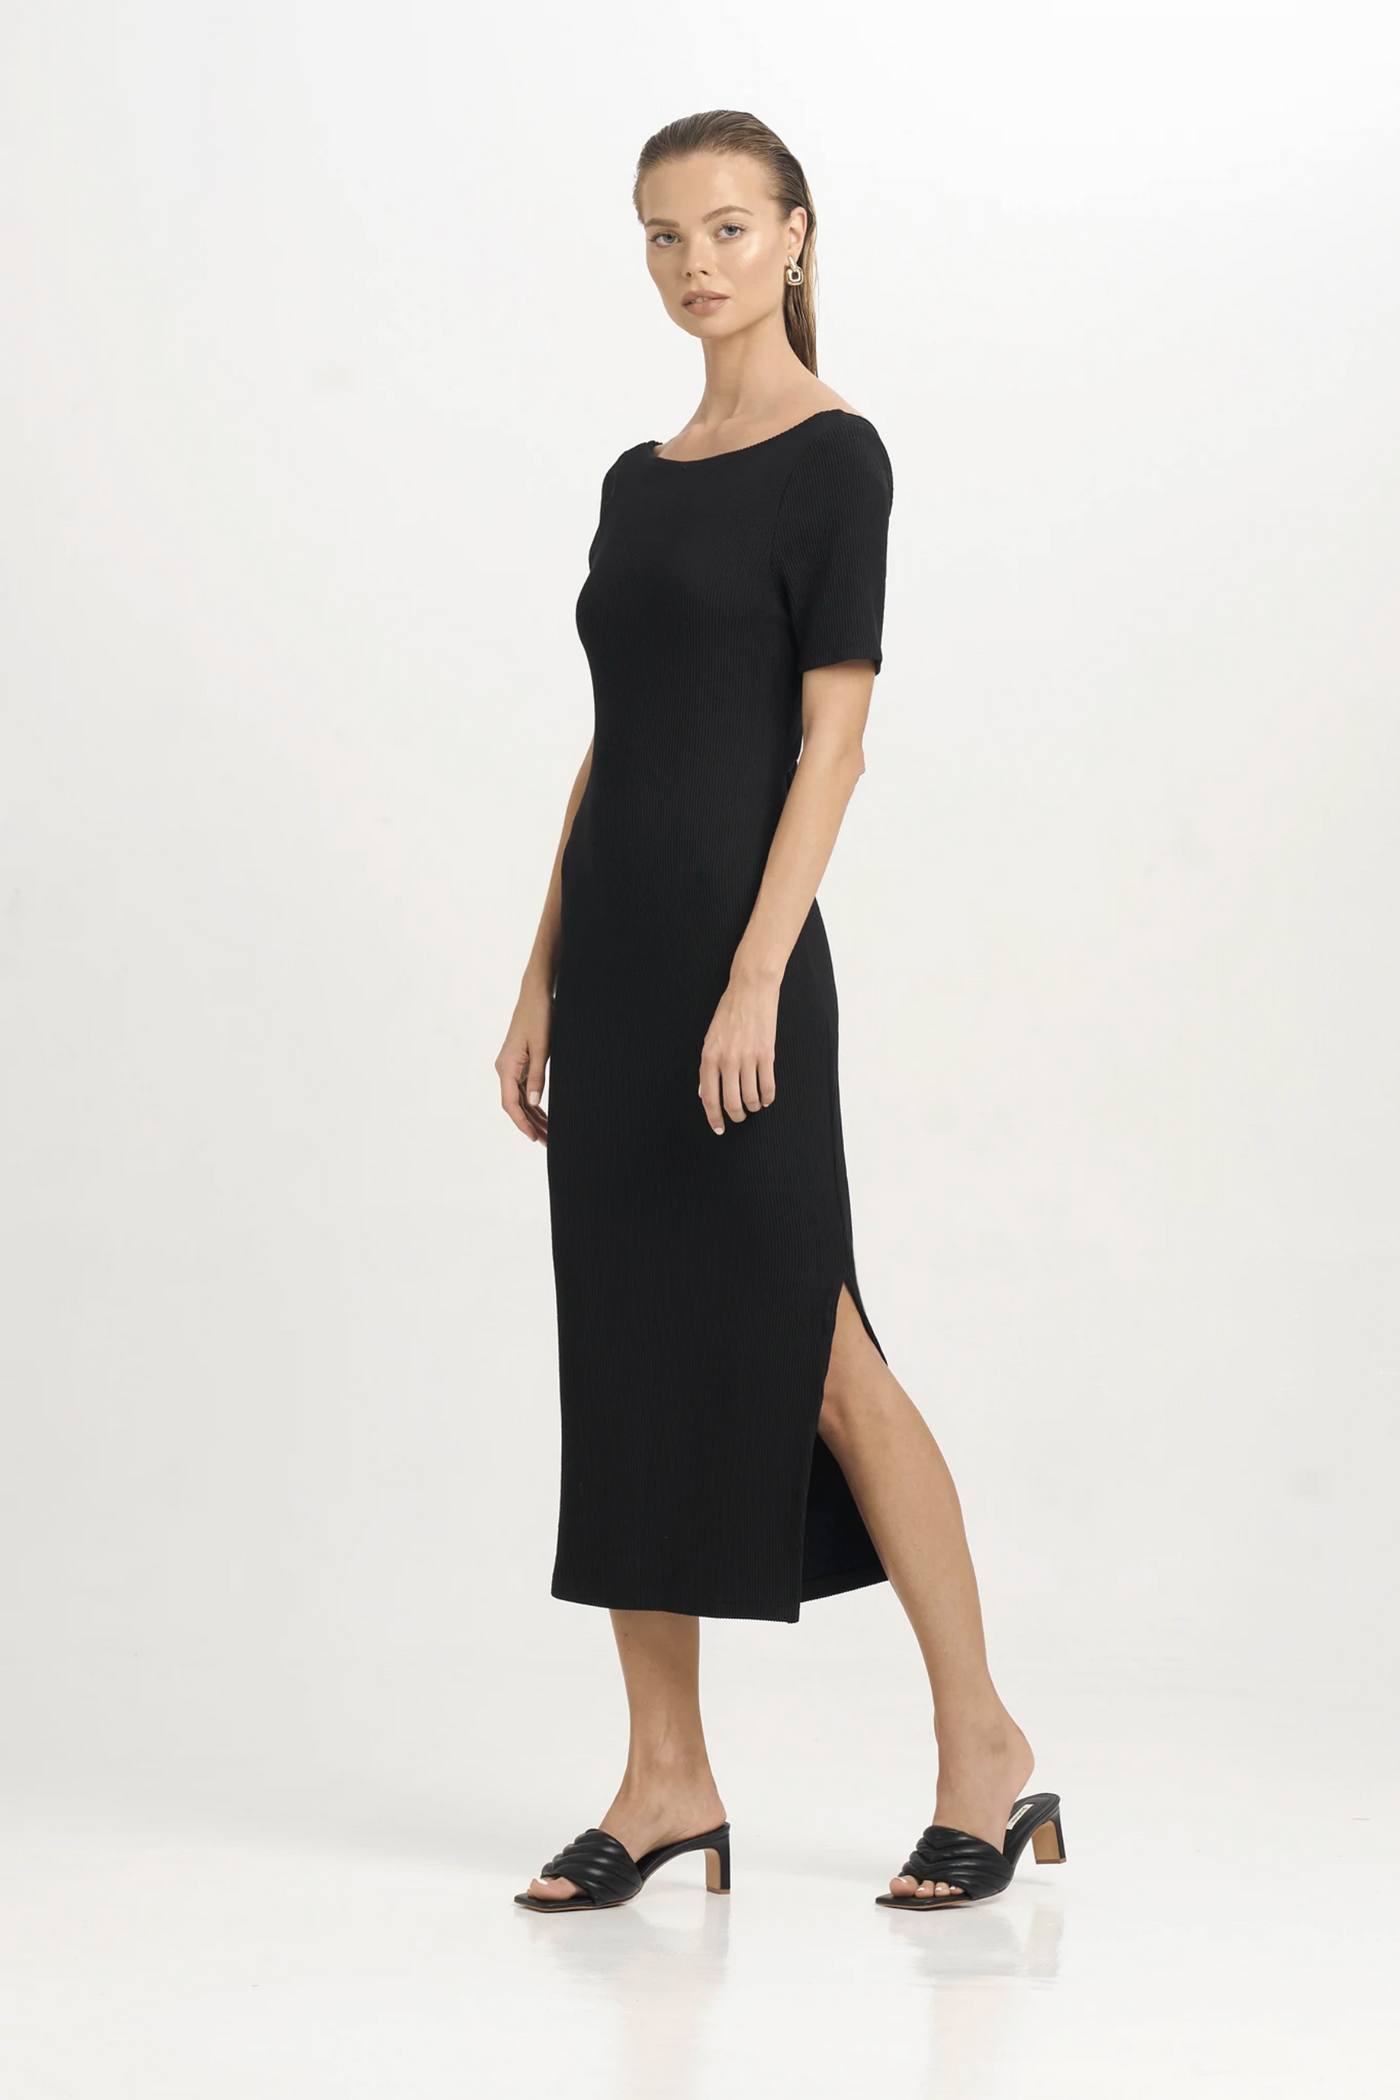 Sans Faff Frederica Reversi Dress, available on ZERRIN with free Singapore shipping